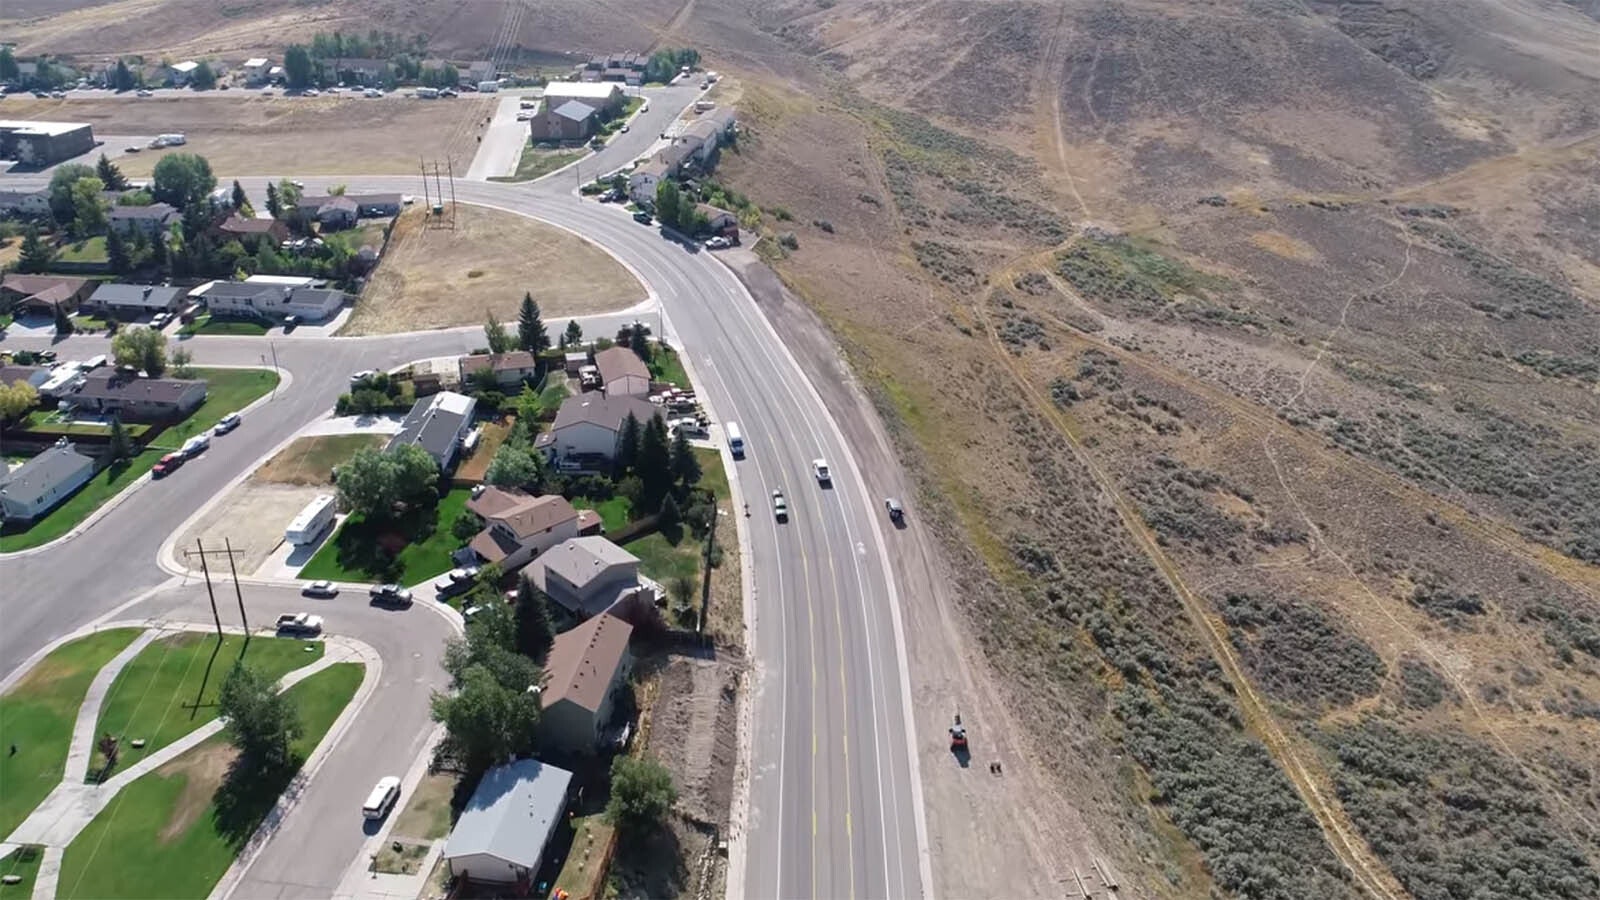 Canyon Road in Kemmerer is where the Canyon Road Development is progressing to bring more housing to accommodate thousands of expected workers.